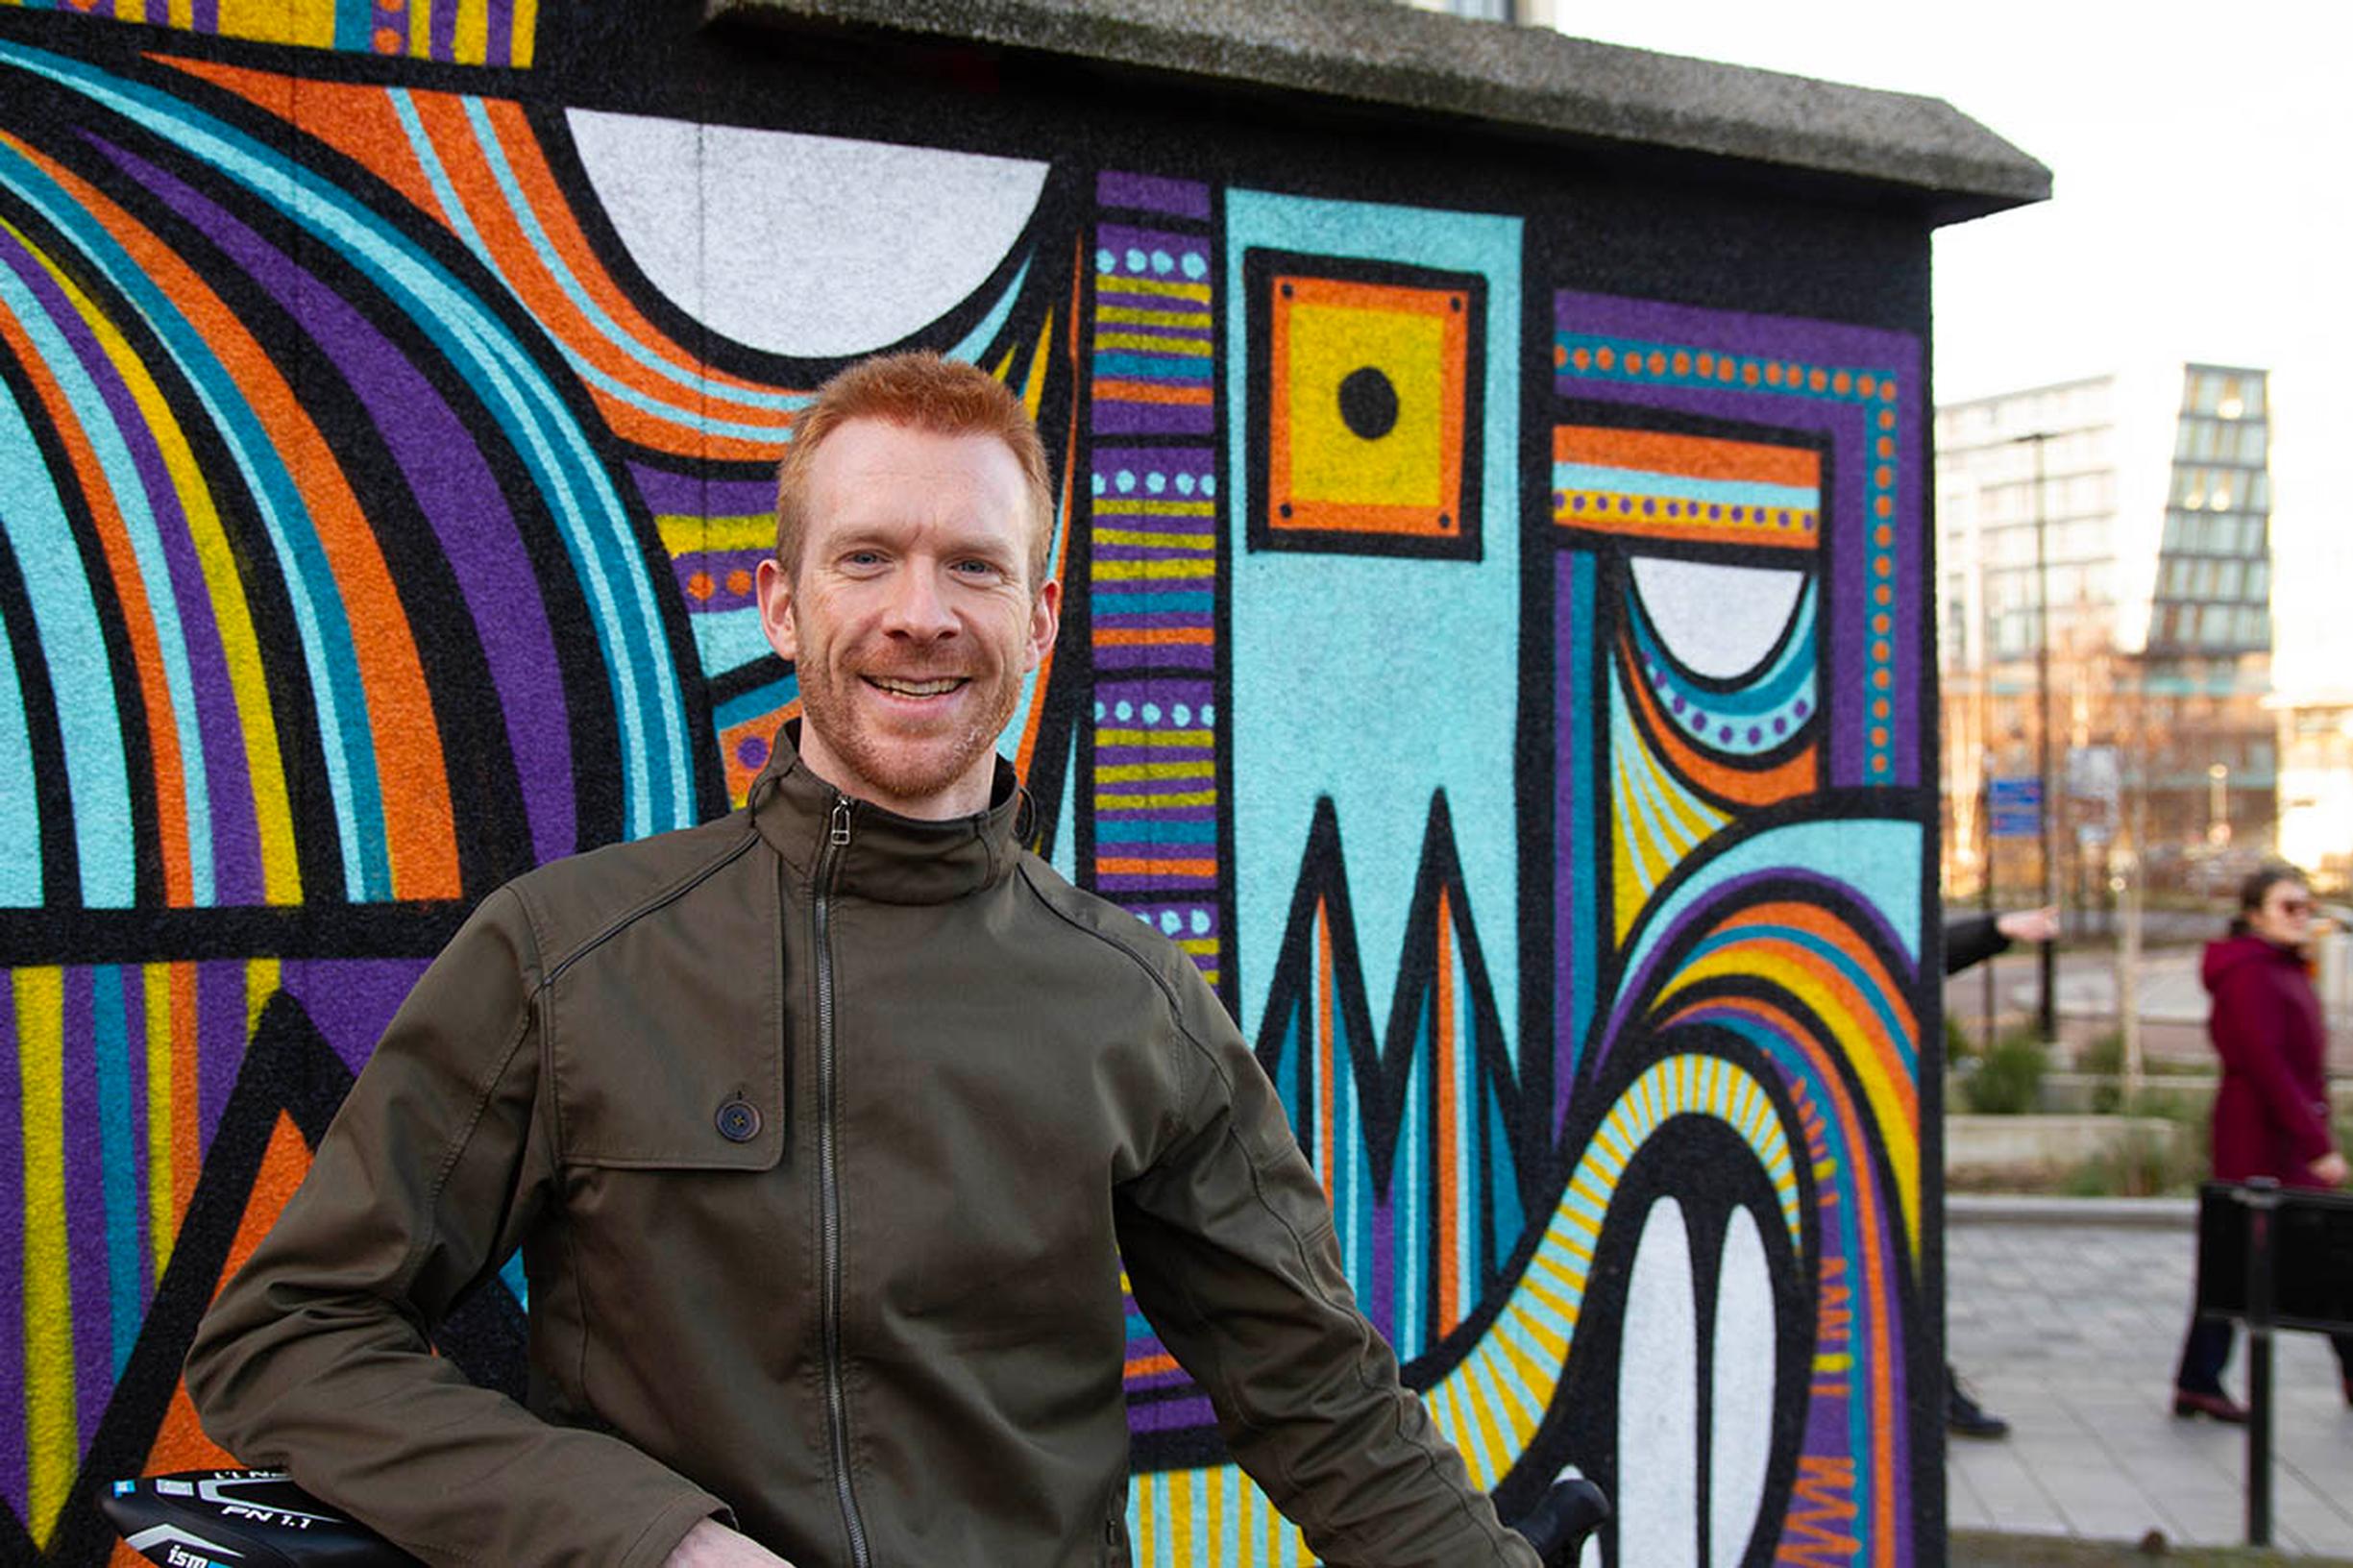 Ed Clancy: Getting Active Travel right is a critical piece of the jigsaw in making South Yorkshire smarter, greener and better-connected.